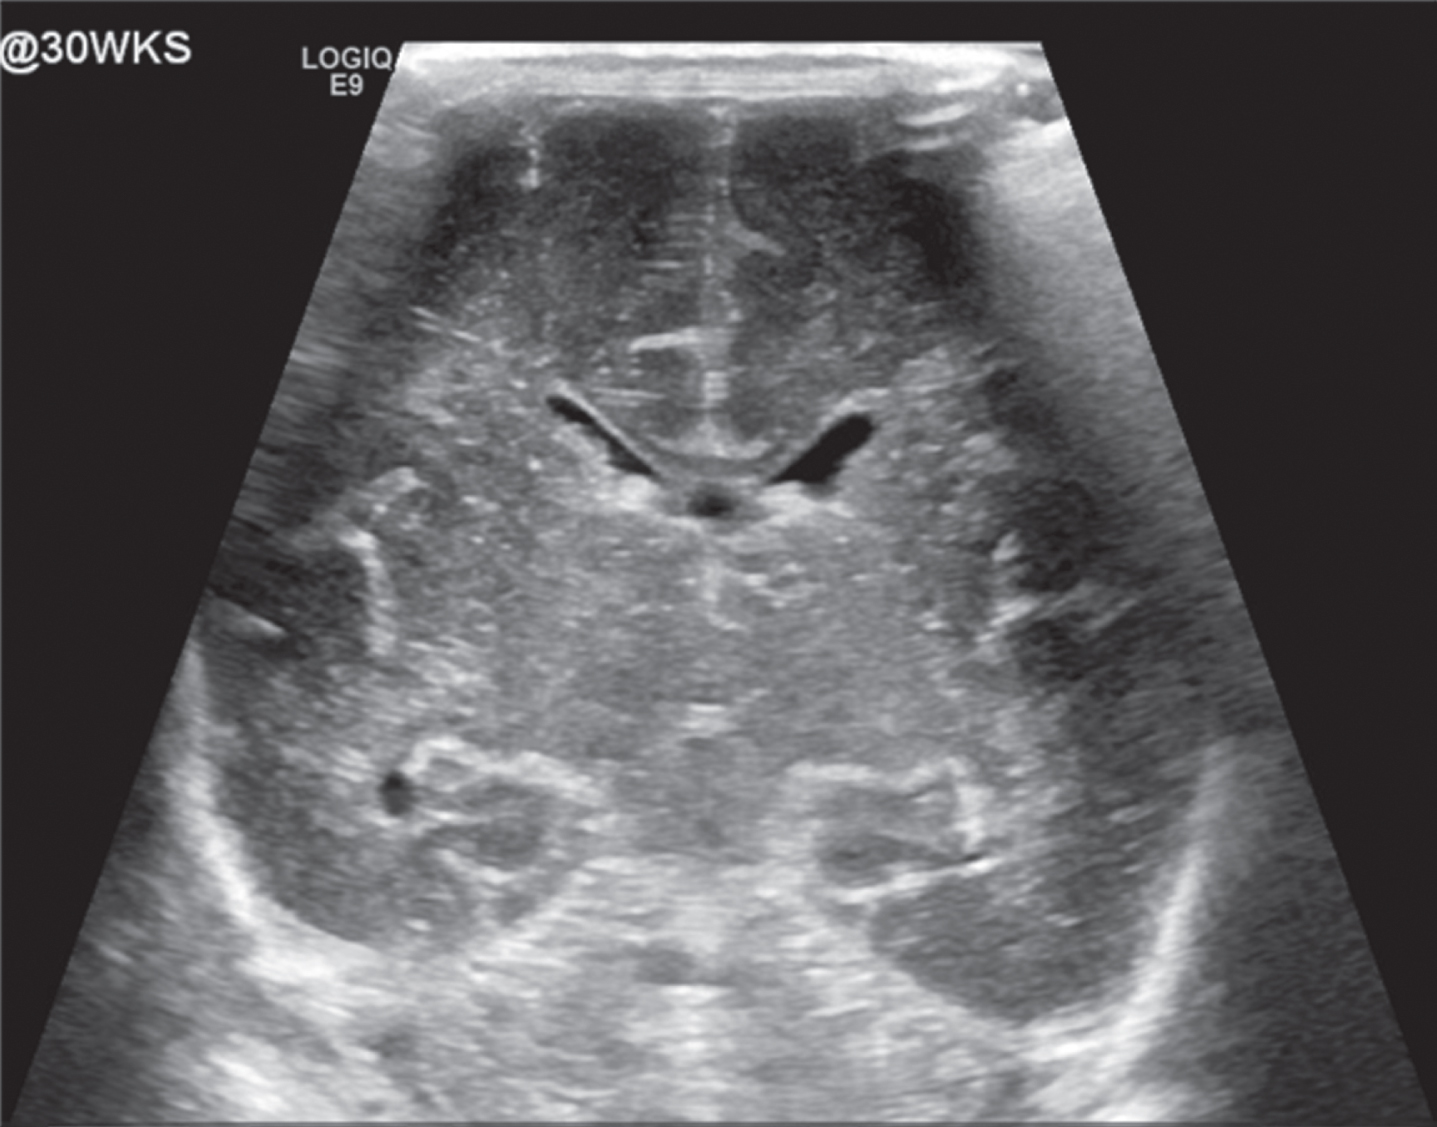 Normal appearing head ultrasound of a 30 week GA newborn at 7 days of life